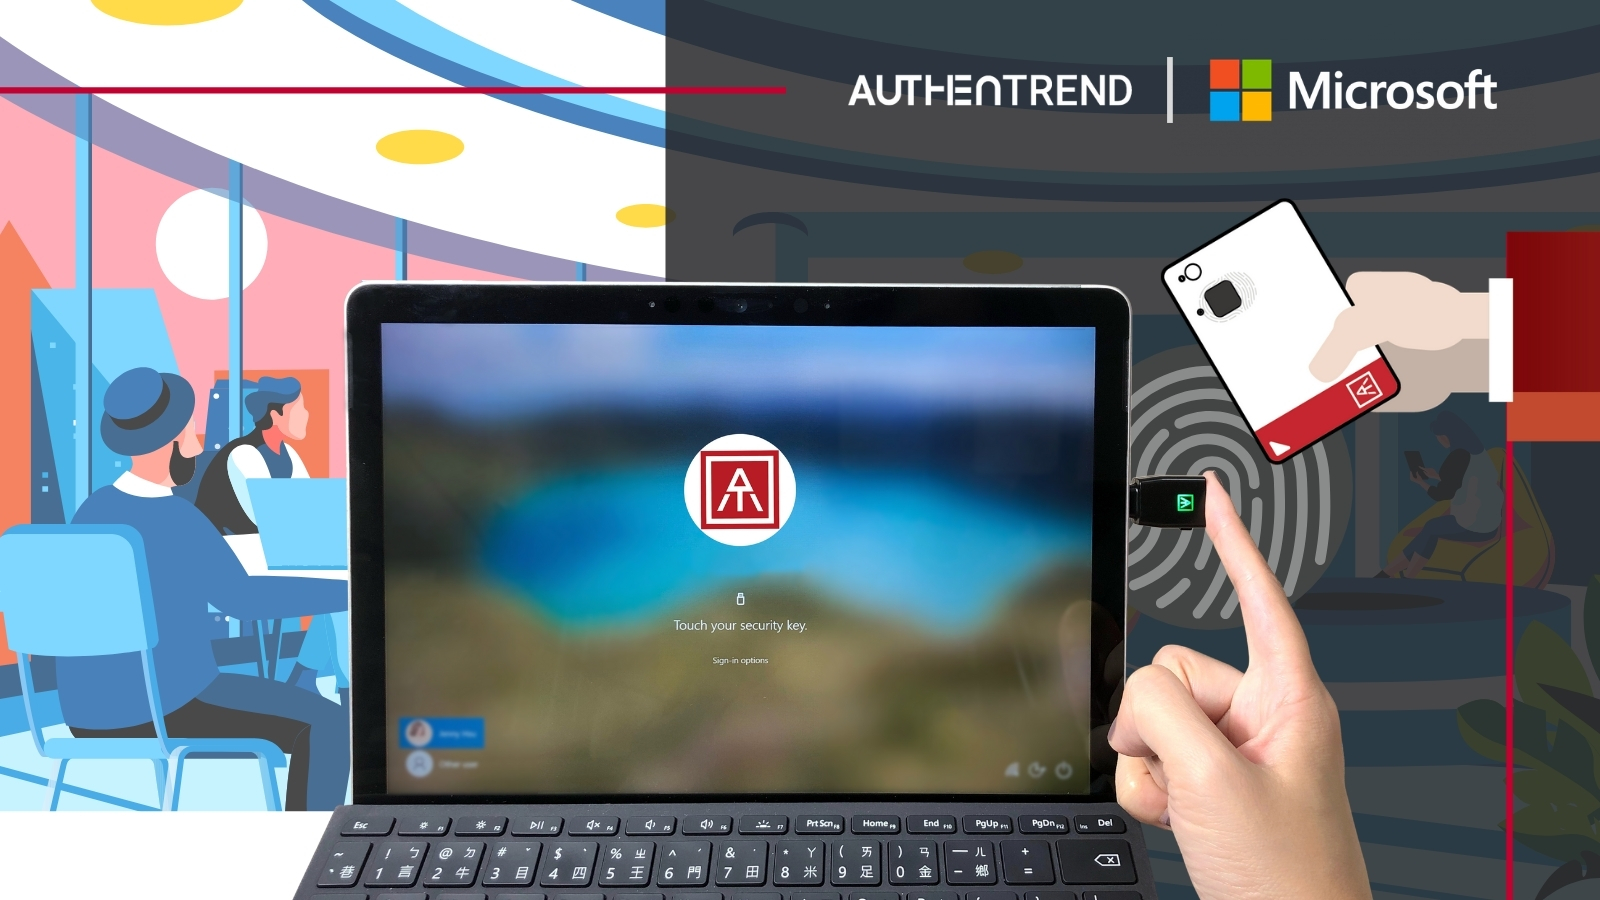 AuthenTrend Biometric Security Keys Integrates with Microsoft to Build a  Passwordless, Worry-Free IT Ecosystem 